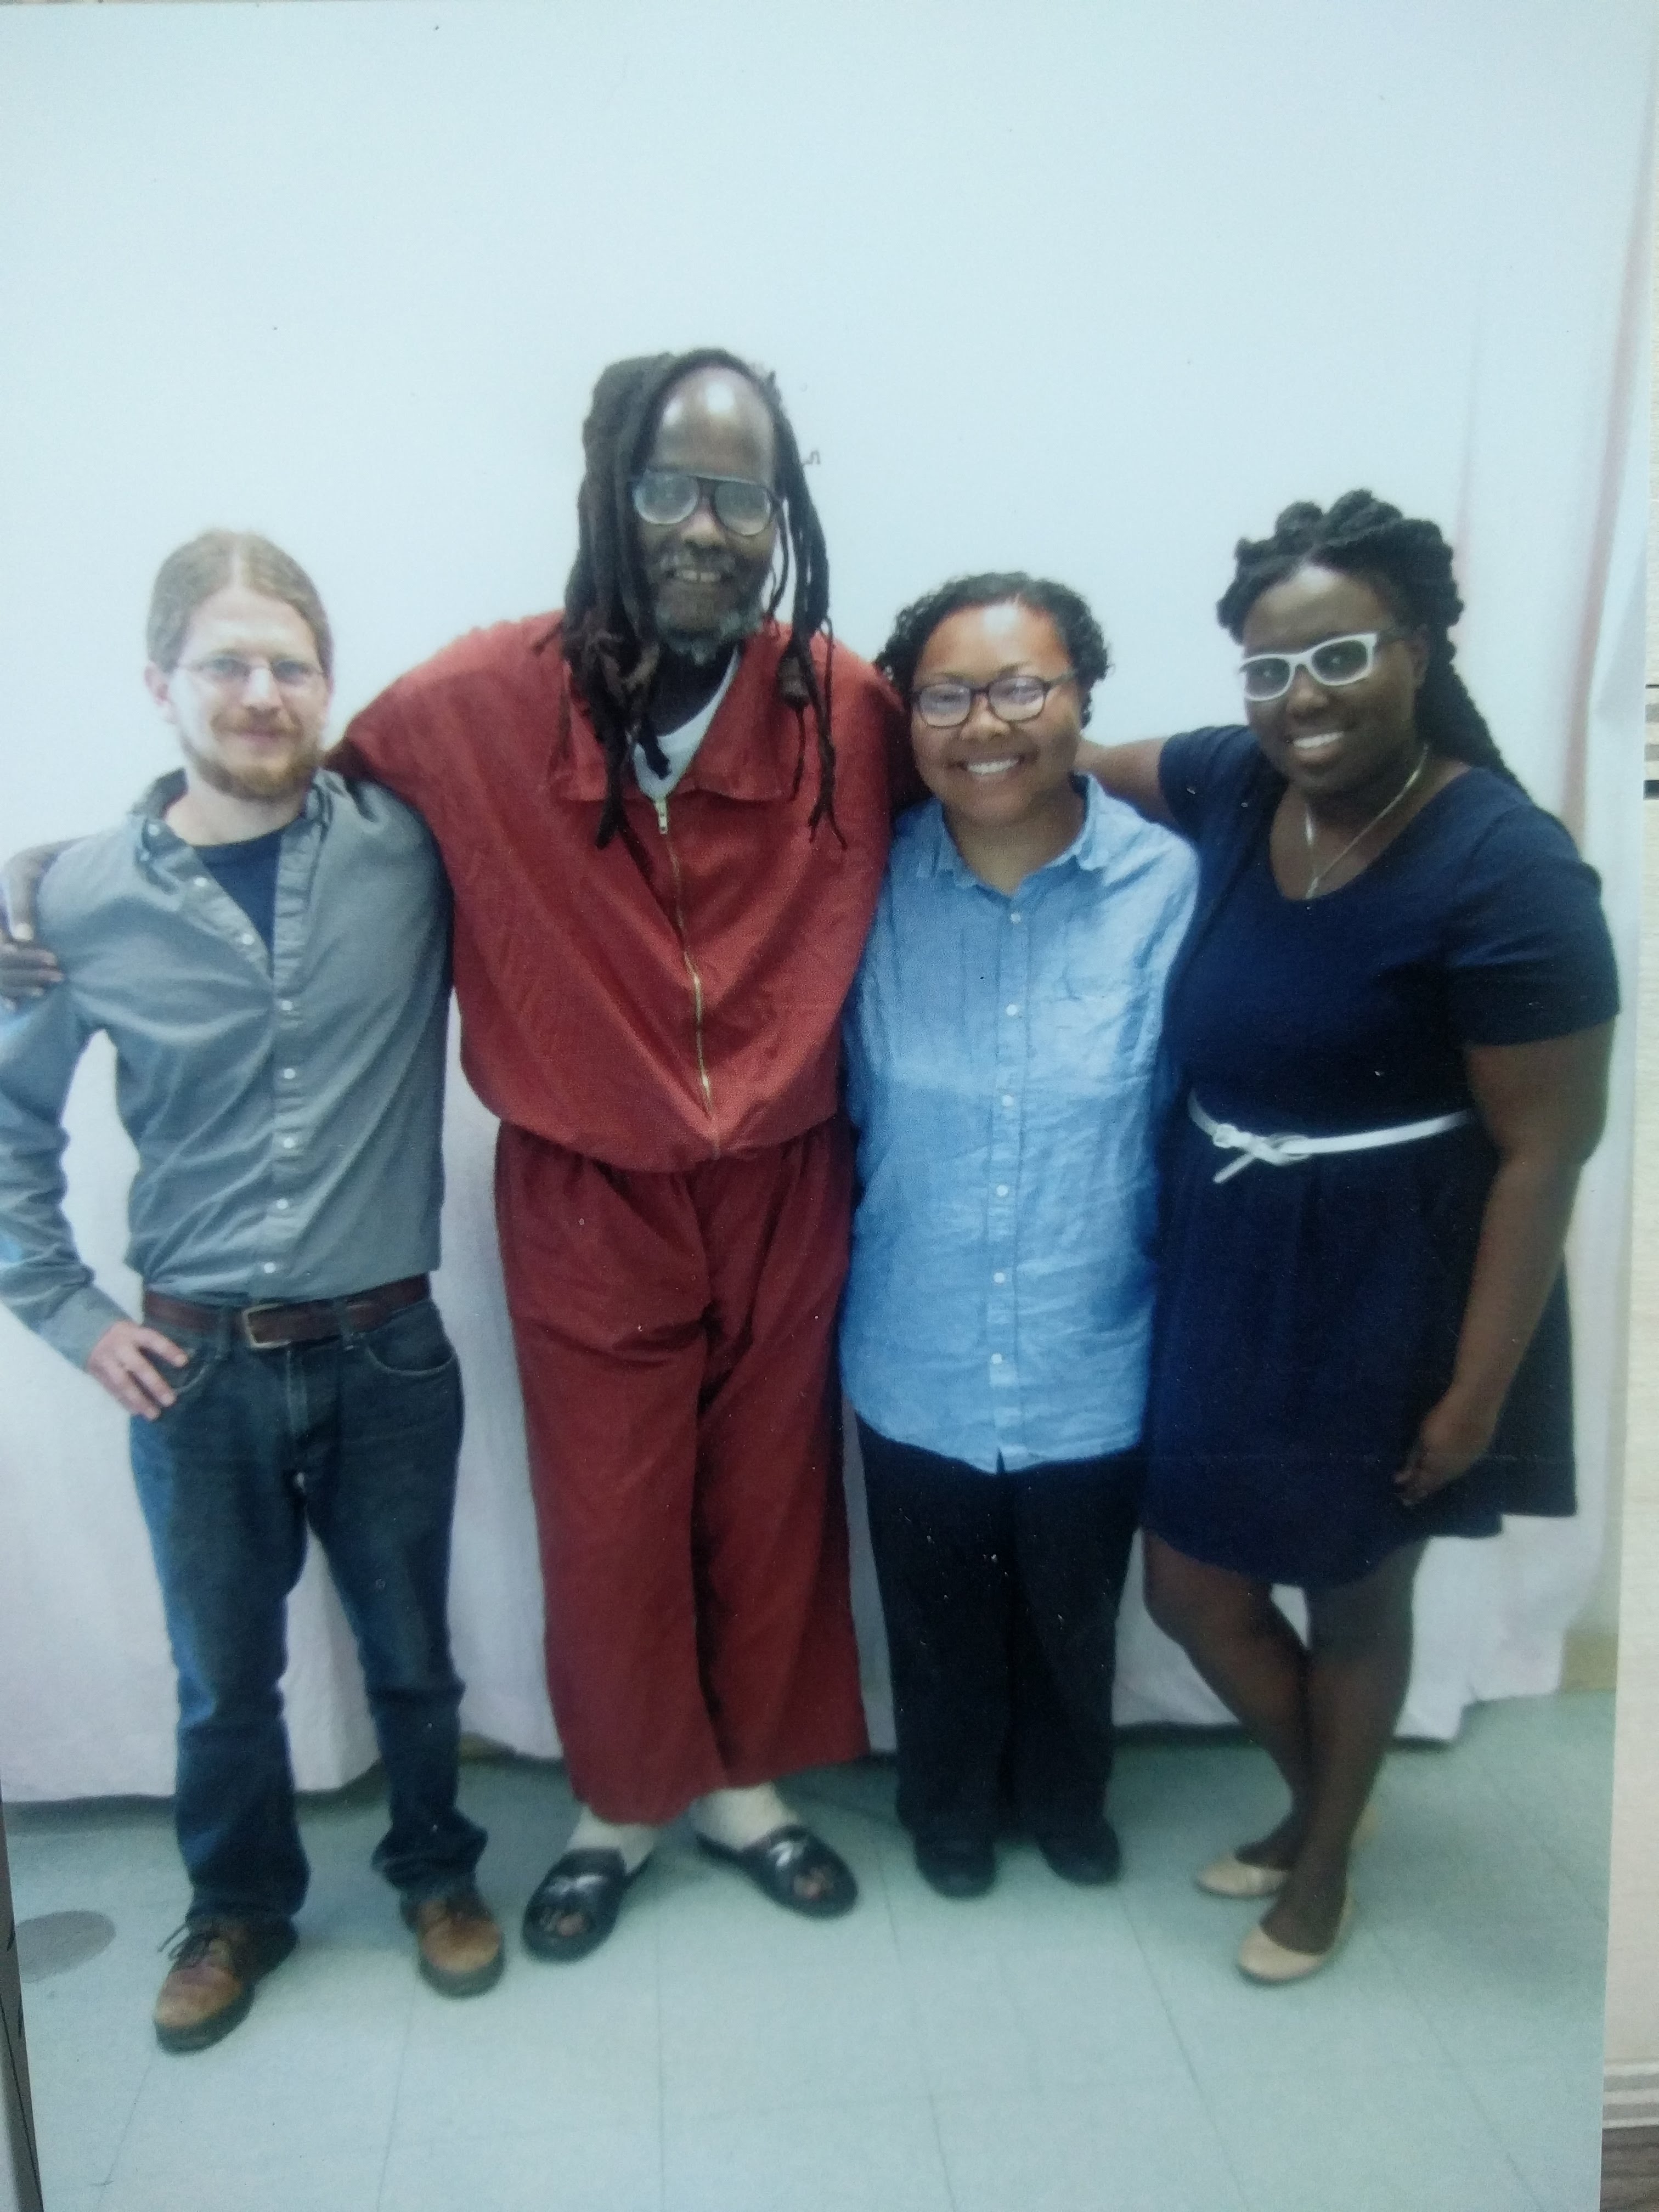 Kris Henderson and Nikki Grant of Amistad Law Project and Bret Grote of Abolitionist Law Center post for a picture during a legal visit with Mumia Abu-Jamal